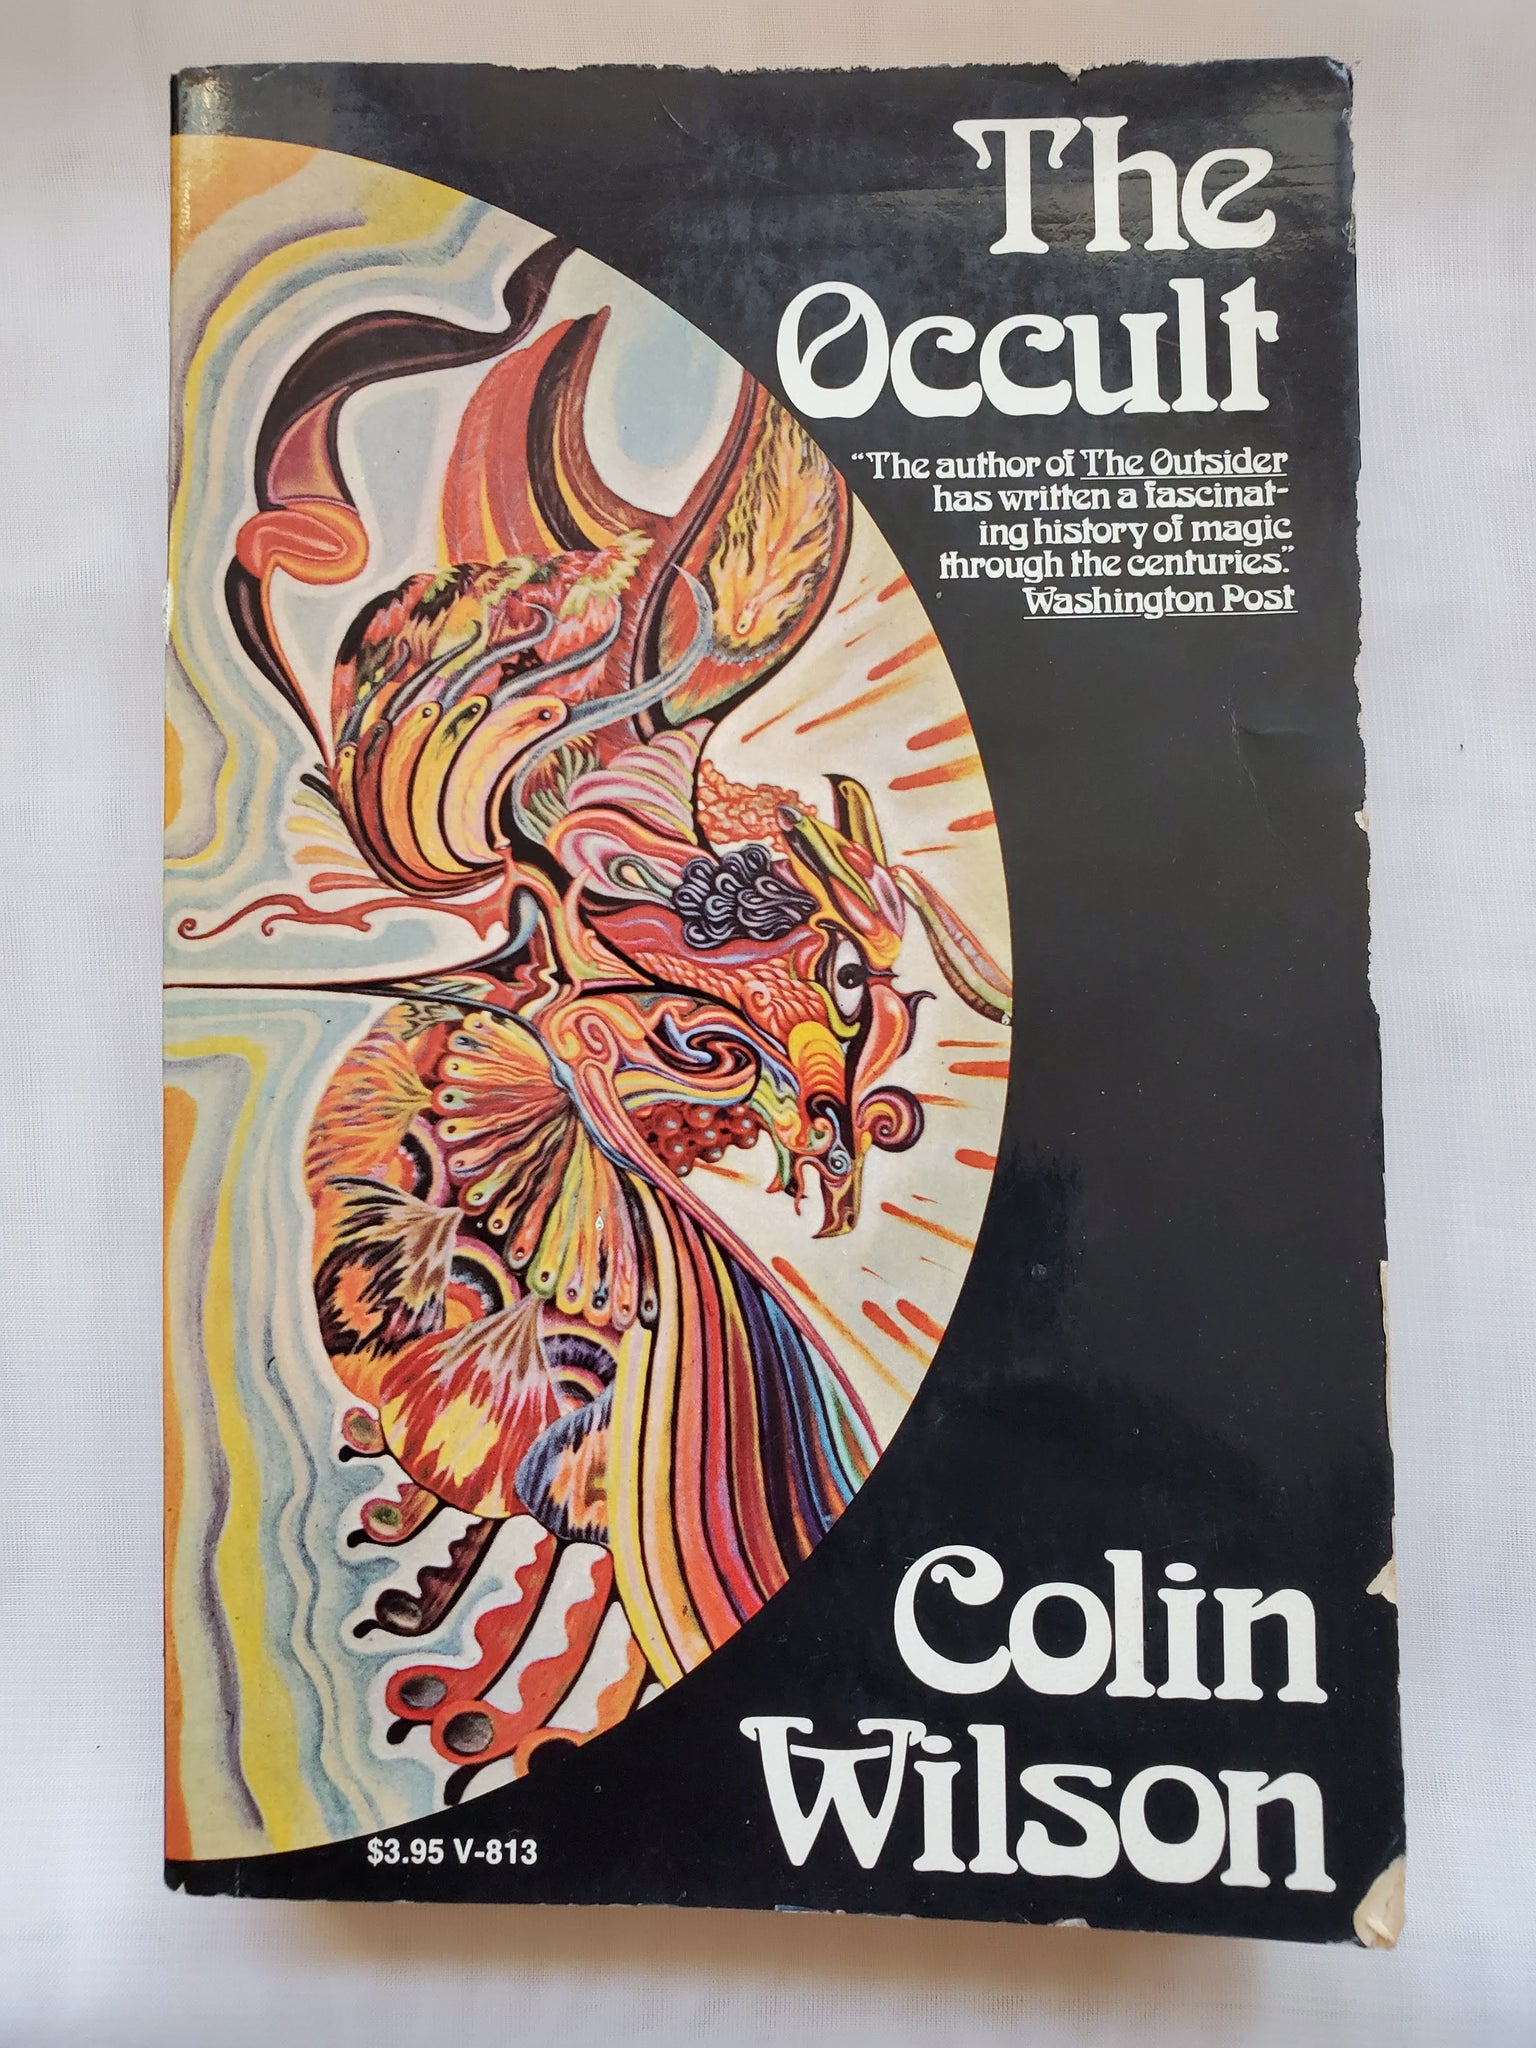 The Occult by Colin Wilson